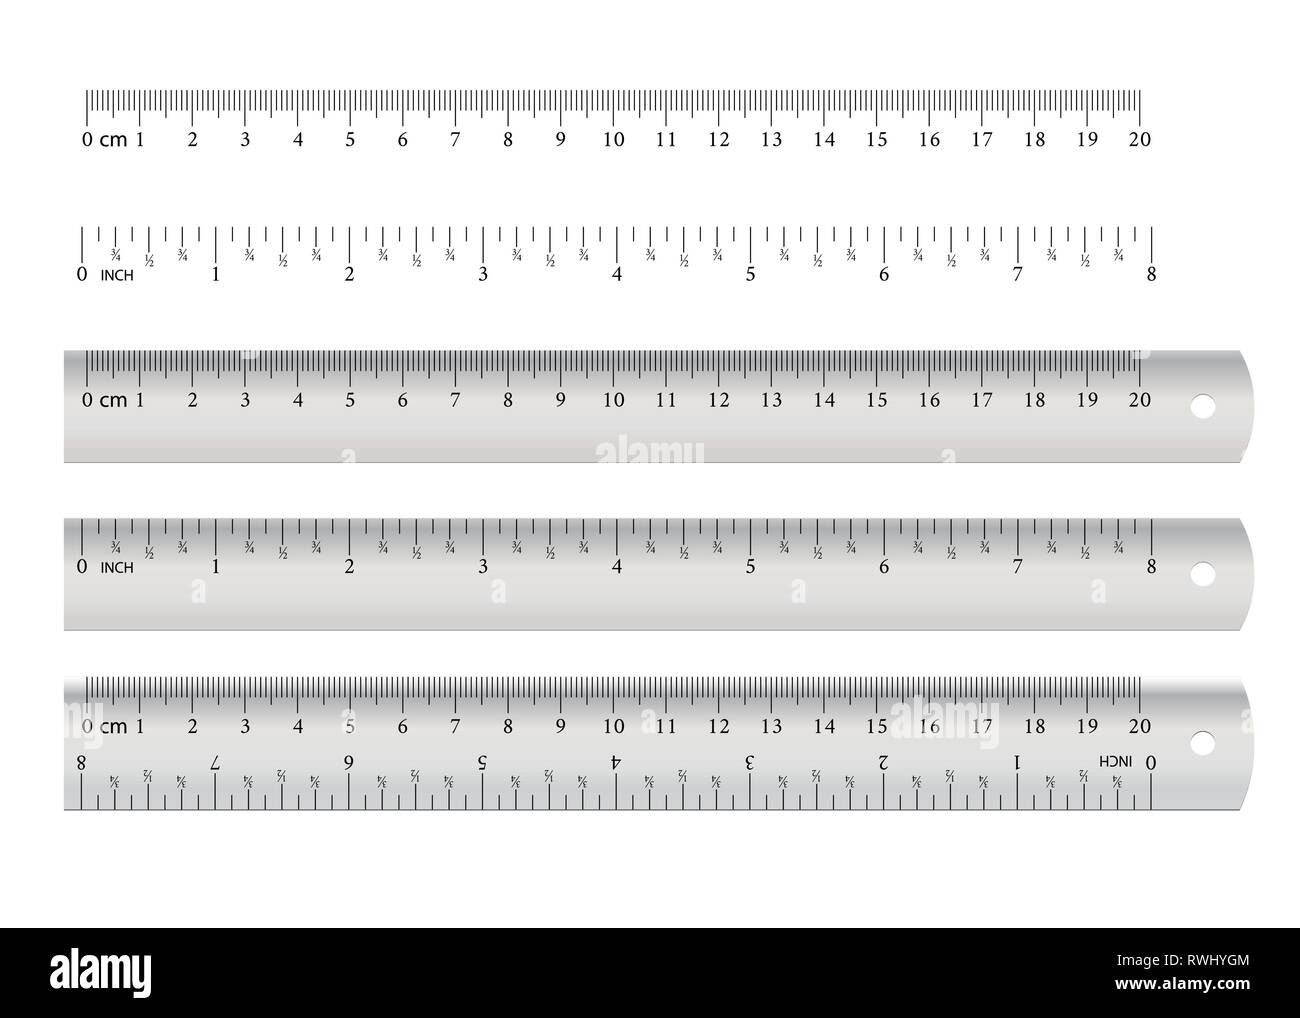 https://c8.alamy.com/comp/RWHYGM/metric-imperial-rulers-centimeter-and-inch-measure-tools-equipment-isolated-on-white-background-RWHYGM.jpg